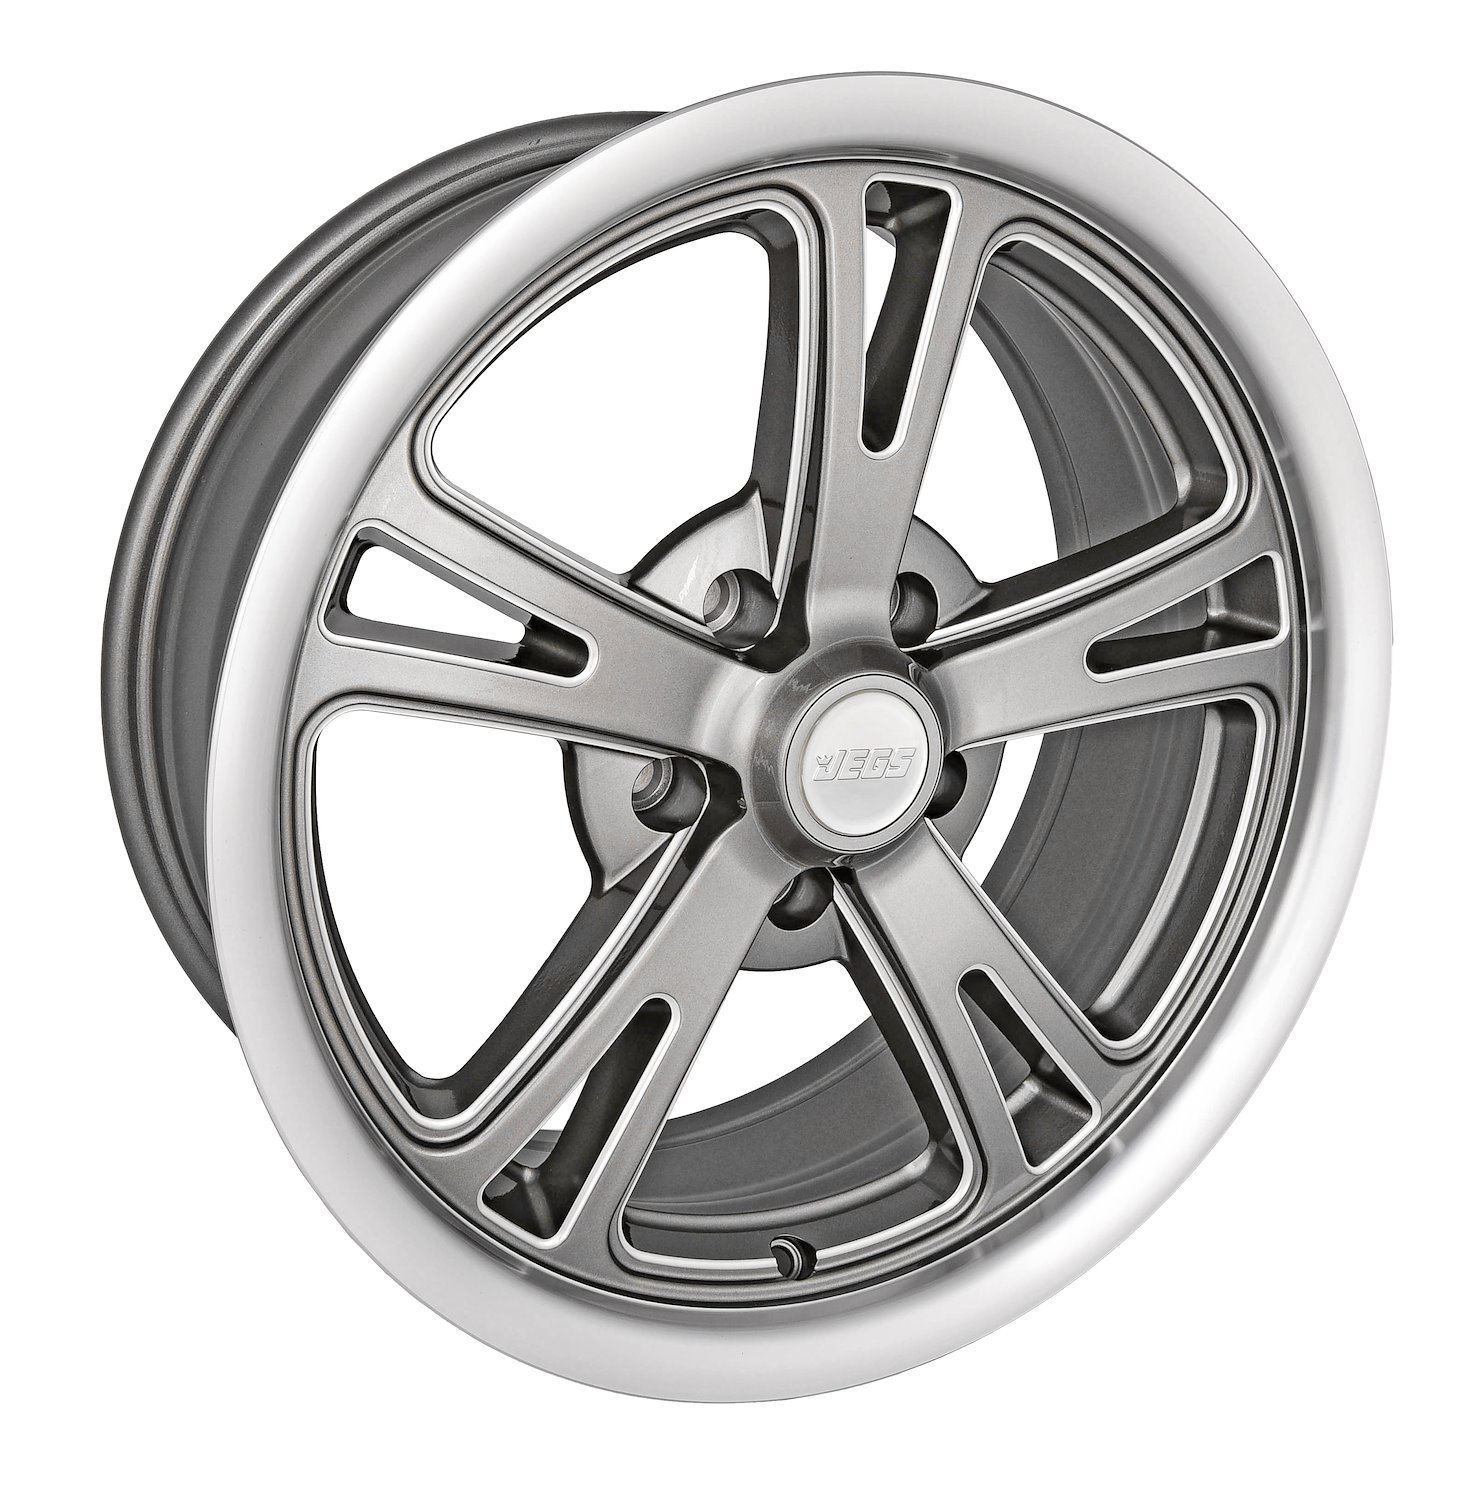 JV-1 Wheel [Size: 17" x 7"] Grey Spokes with Milled Outer Lip